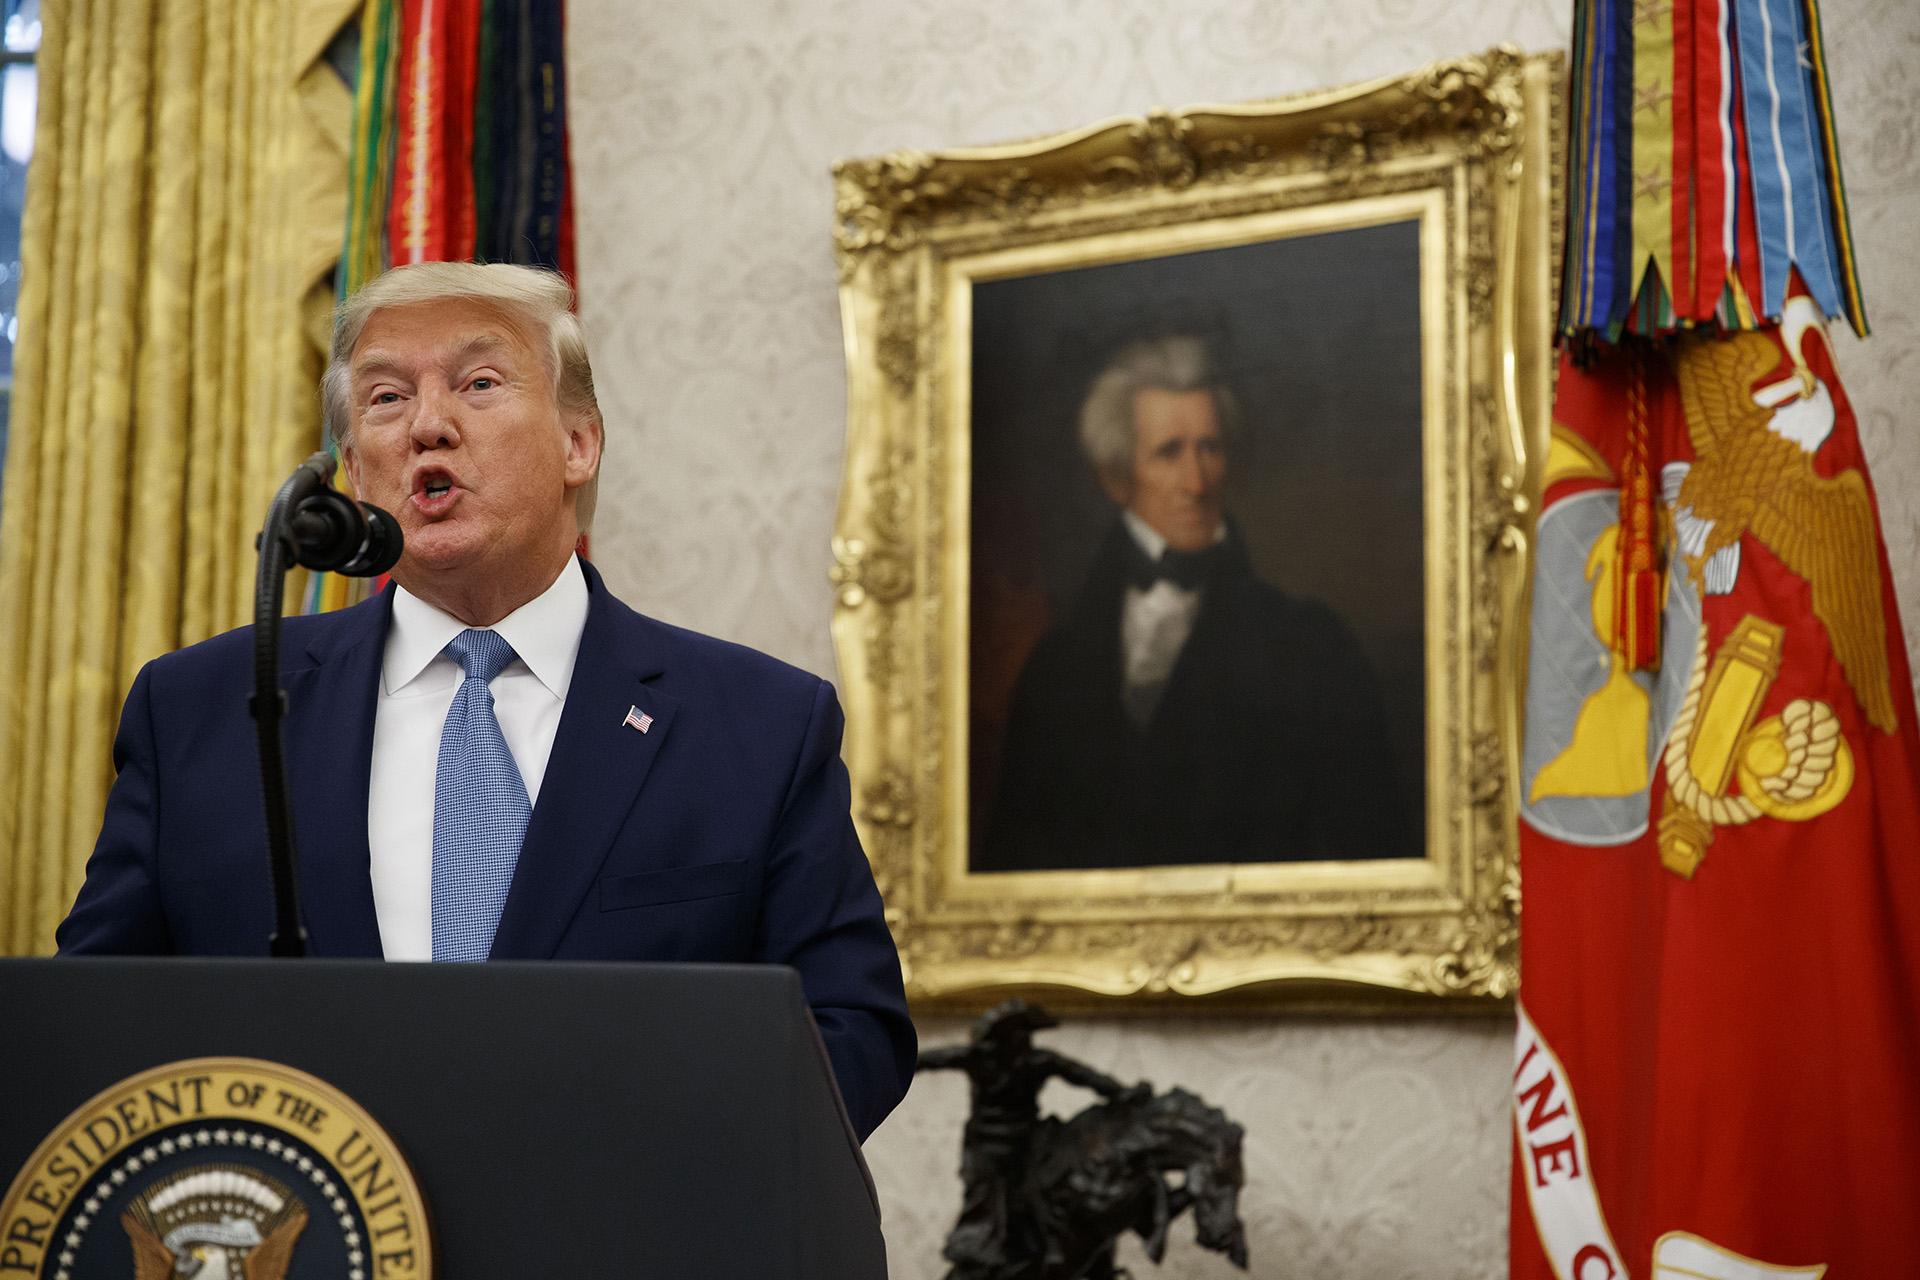 President Donald Trump speaks during a ceremony to present the Presidential Medal of Freedom to former Attorney General Edwin Meese, in the Oval Office of the White House, Tuesday, Oct. 8, 2019, in Washington. (AP Photo / Alex Brandon)